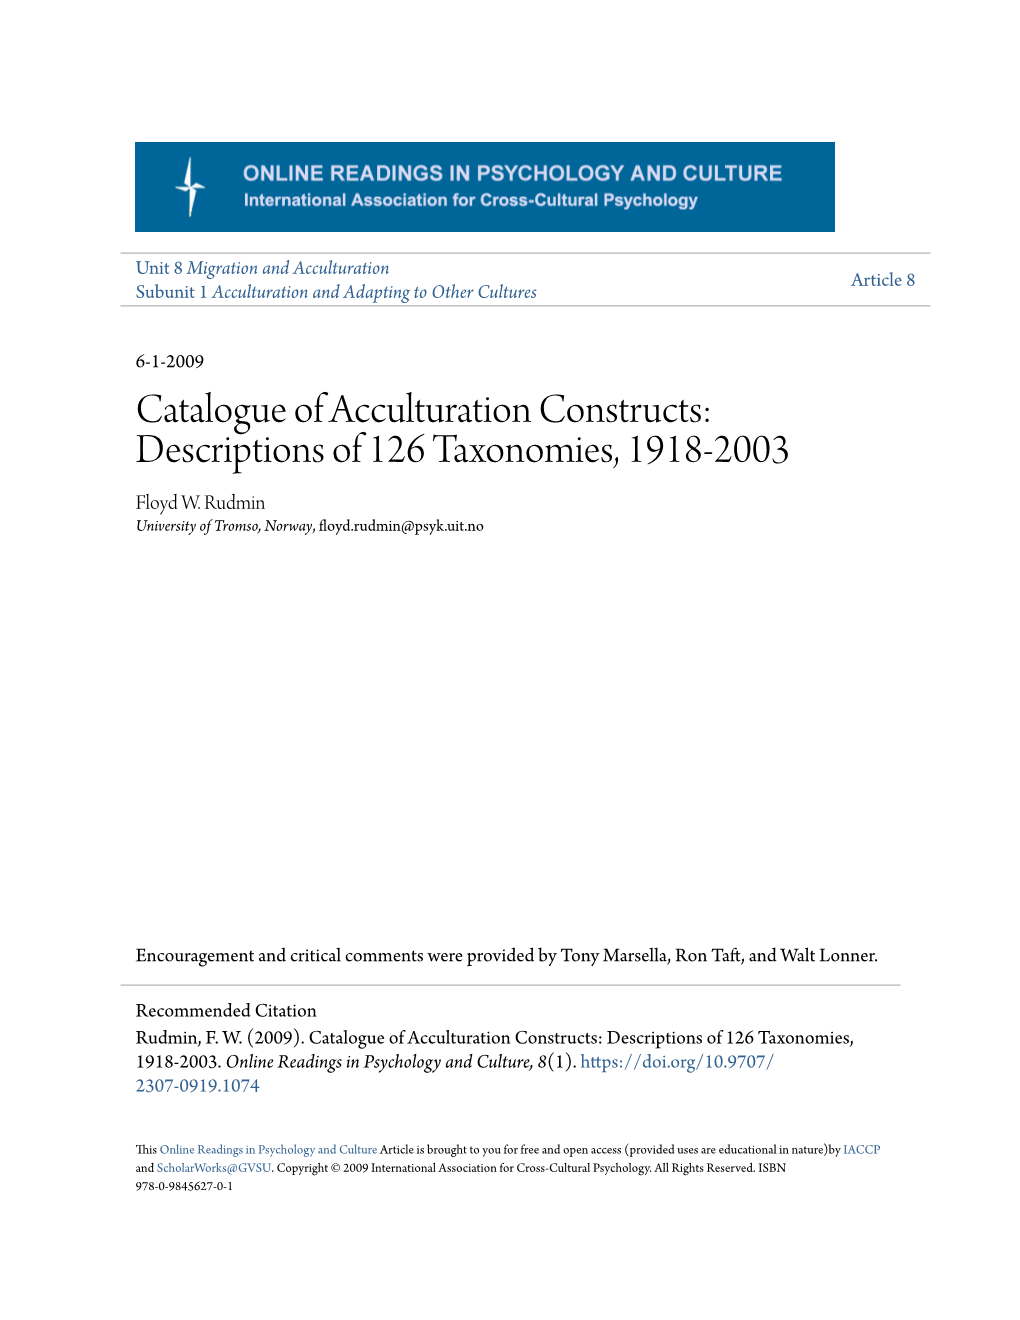 Catalogue of Acculturation Constructs: Descriptions of 126 Taxonomies, 1918-2003 Floyd W